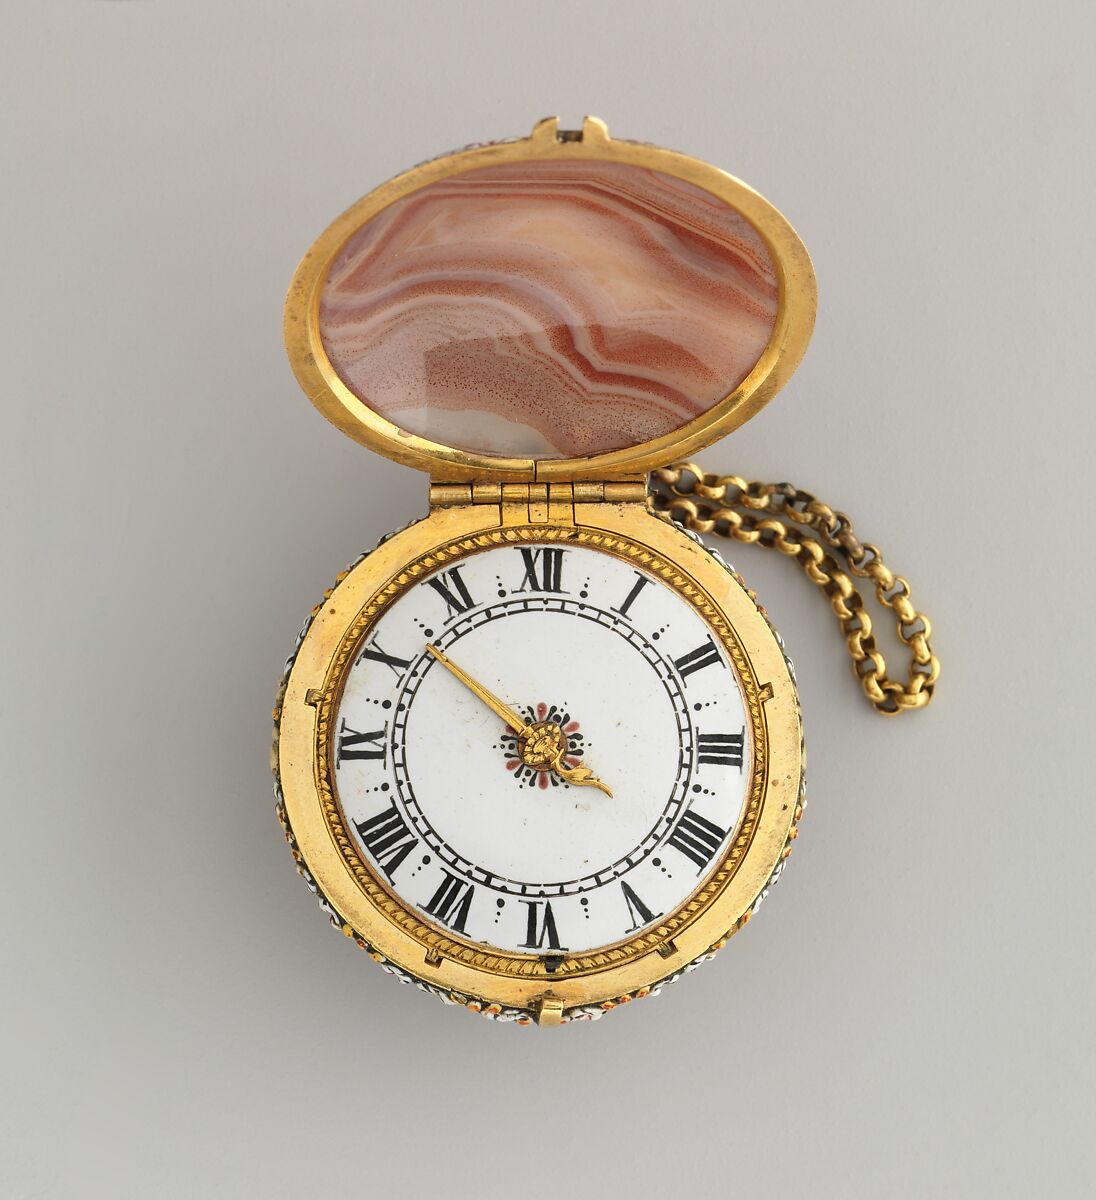 Watch, Watchmaker: Charles Bobinet (Swiss, 1610–1678), Case: agate with enameled golt mounts; Dial: white enamel with gold hand; Movement: gilded brass and partly blued steel, Swiss, Geneva 